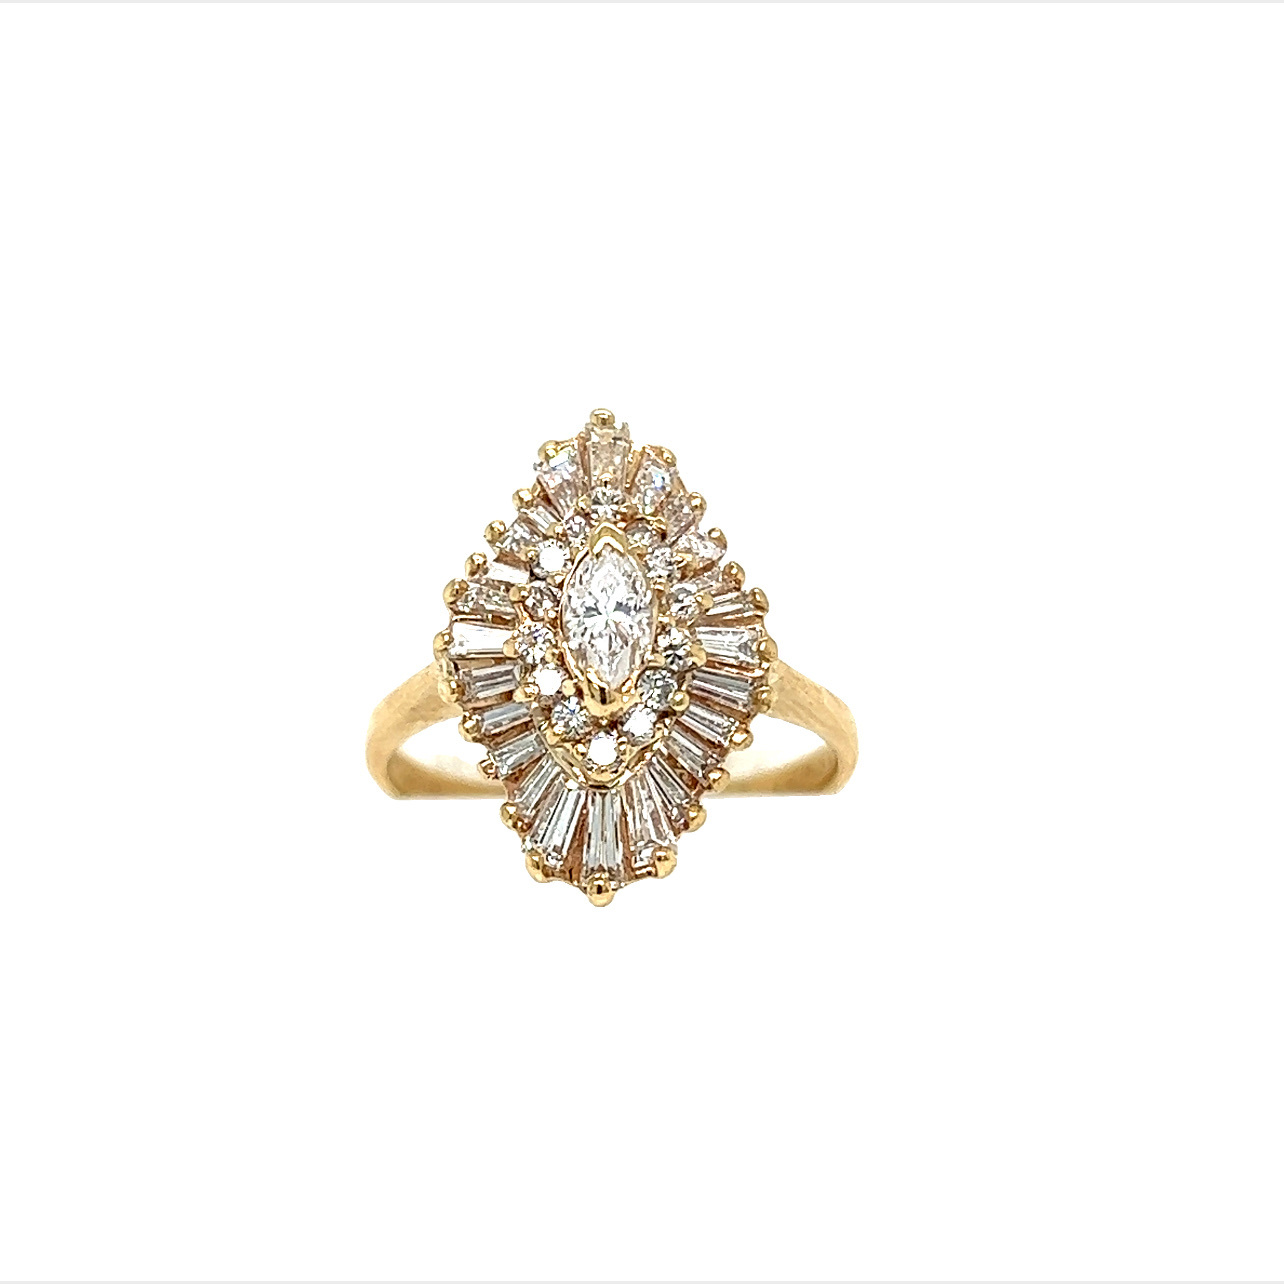 Yellow 14 Karat Ring  With One 0.25ct Marquise G VS Diamond   14=0.28tw Round Brilliant G VS Diamonds and  24=0.72tw Tapered Baguette G/H VS Diamonds